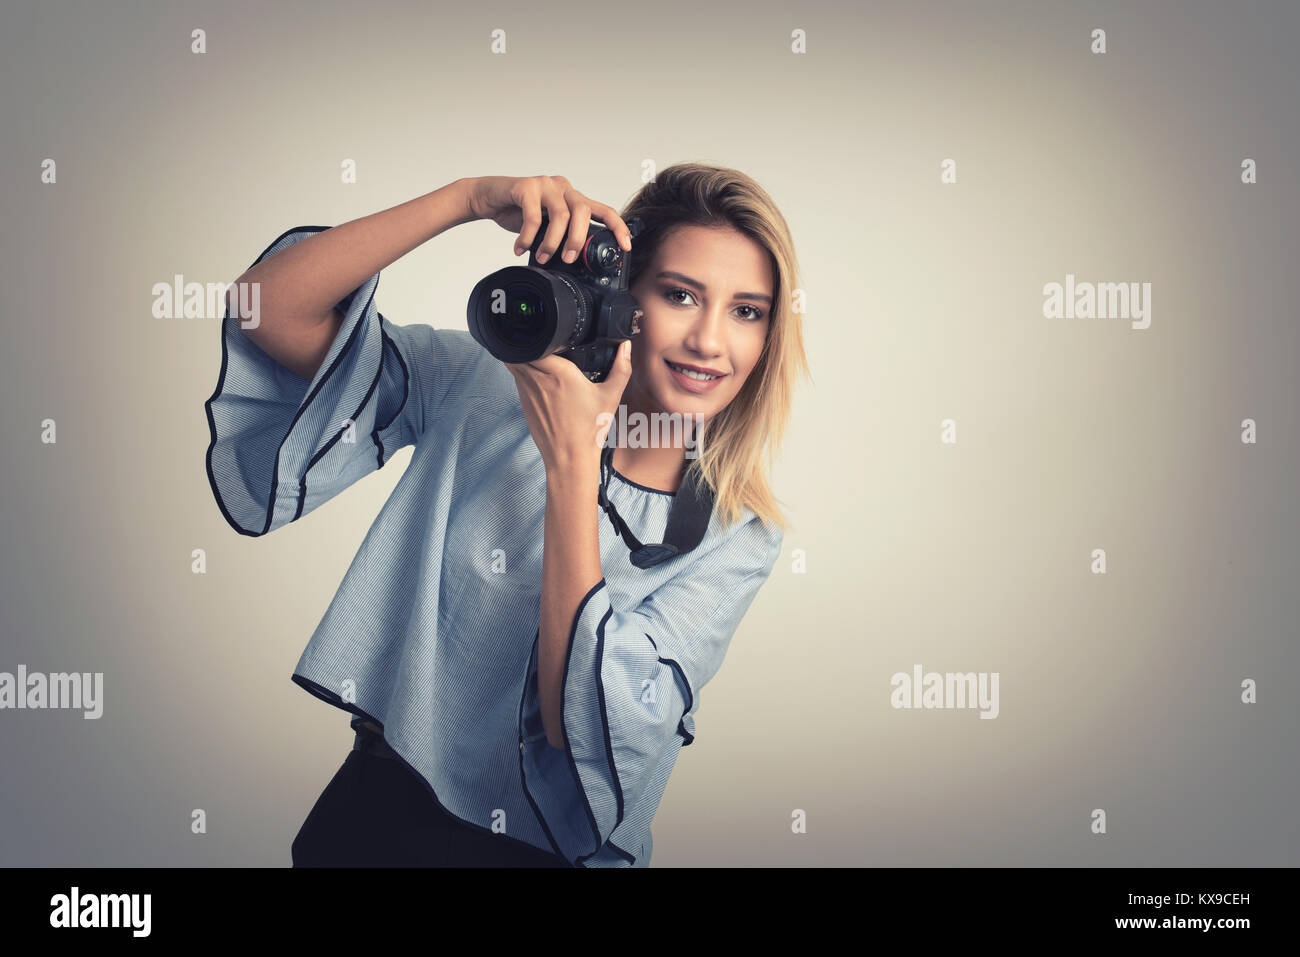 Cheerful young woman making photo on camera over gray background Stock Photo